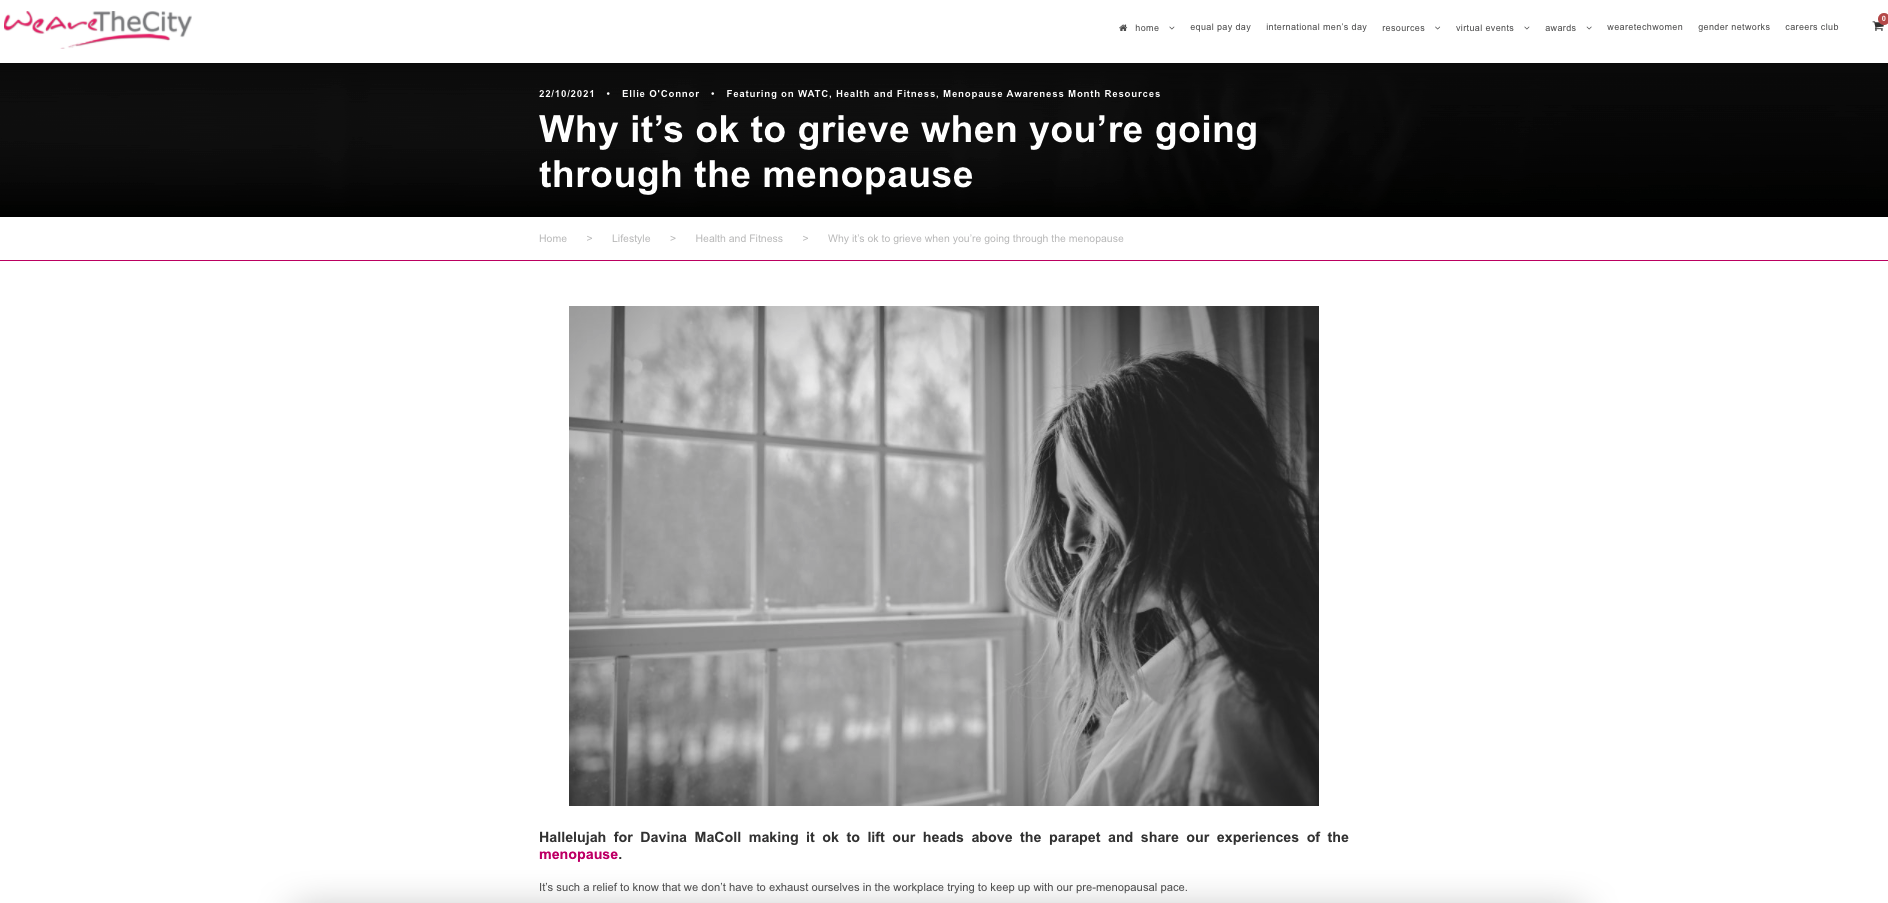 It’s ok to grieve when you’re going through the menopause